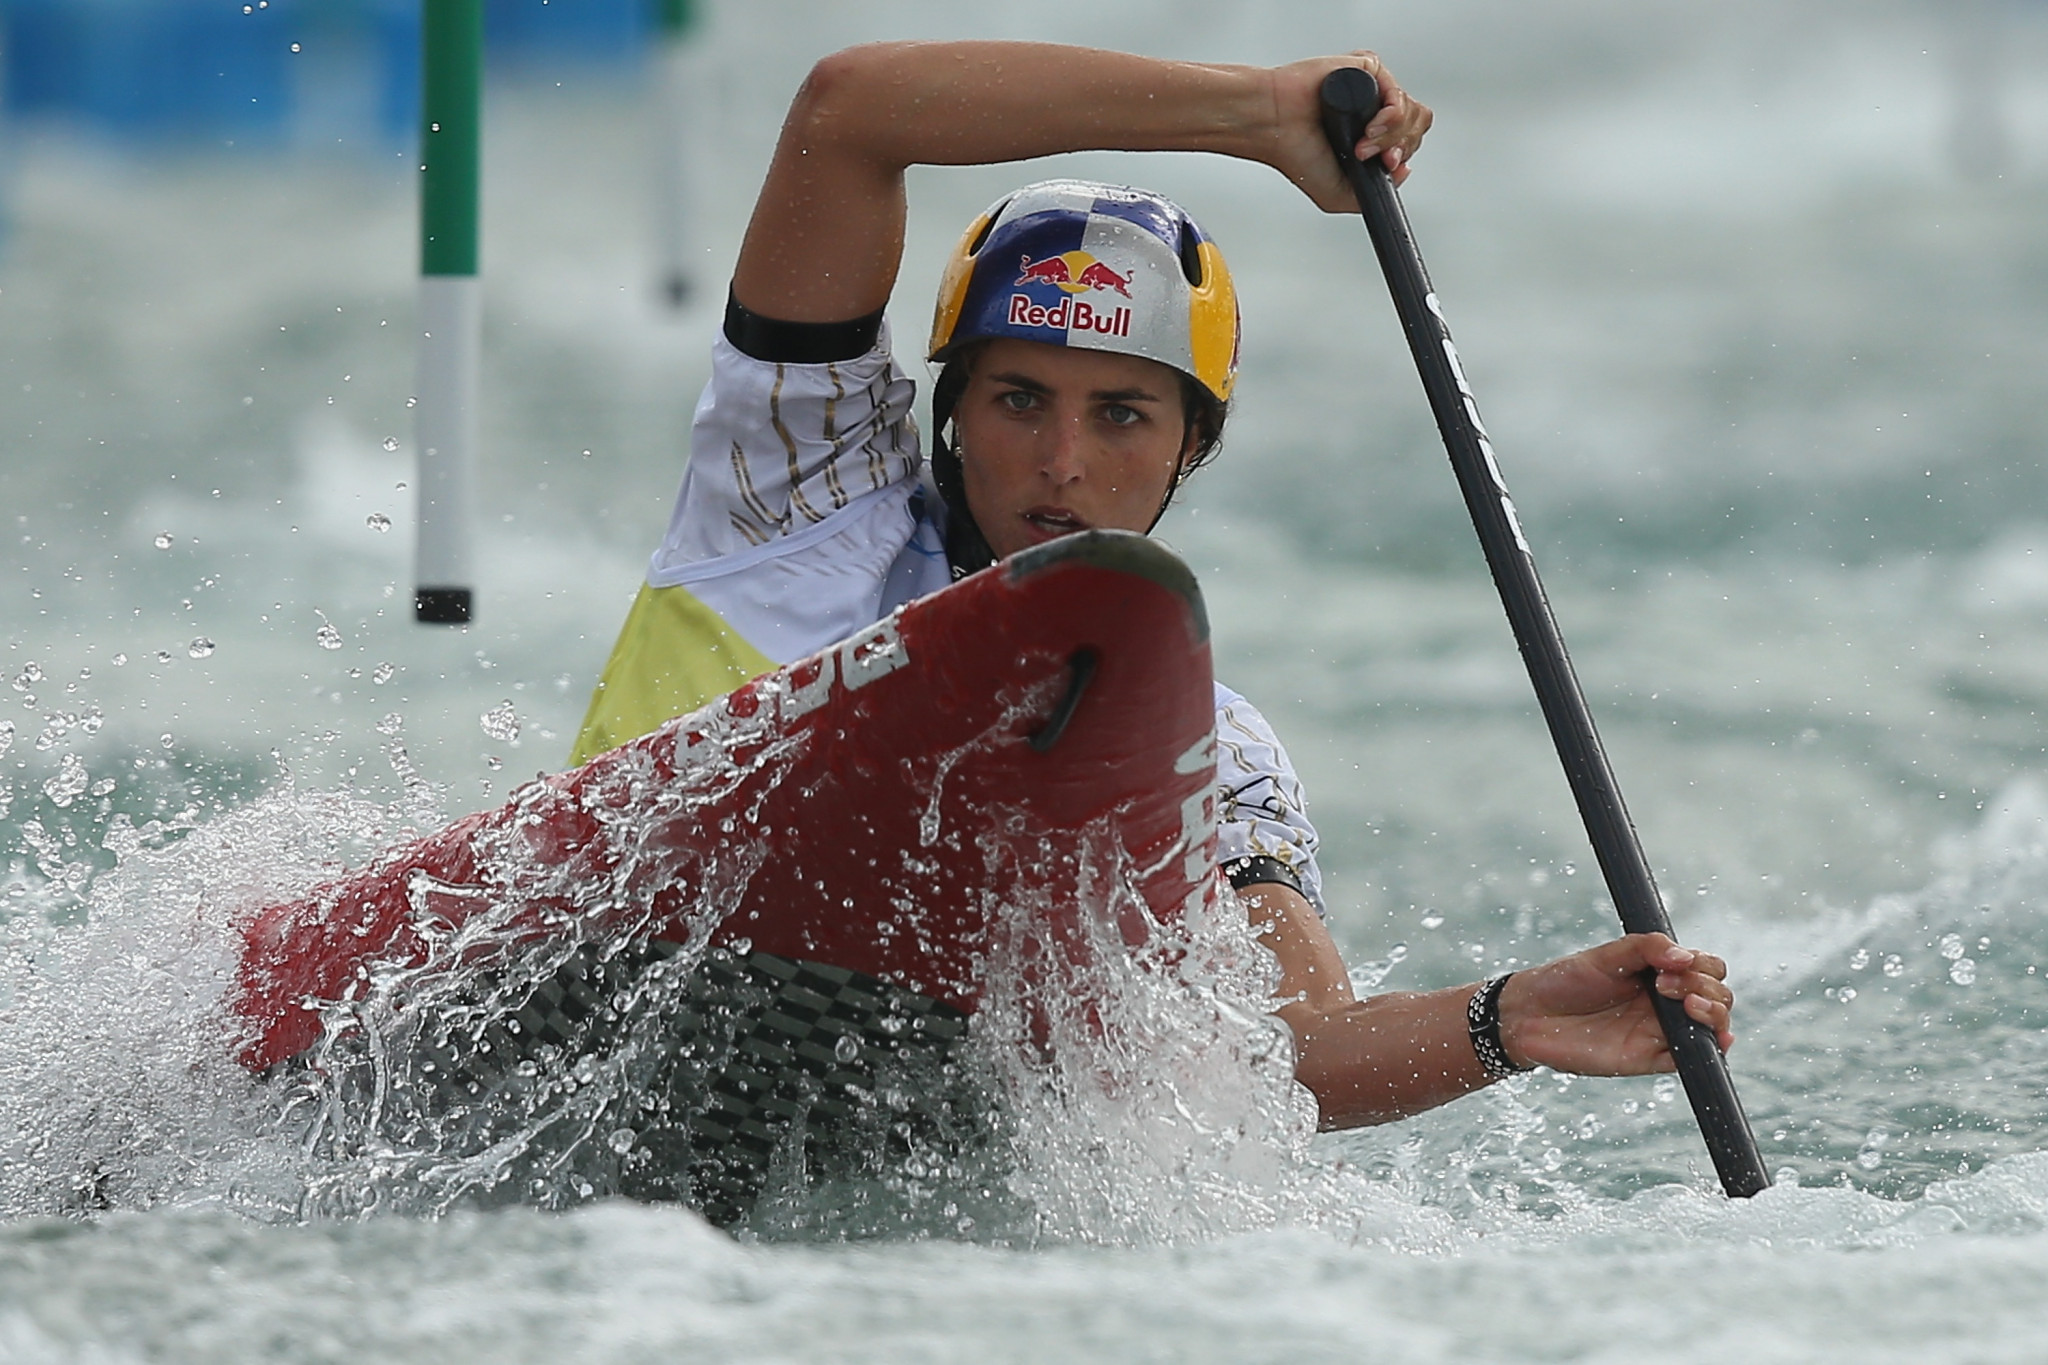 Jessica Fox sealed the K1 gold after a tight battle with New Zealand's Luuka Jones ©Getty Images